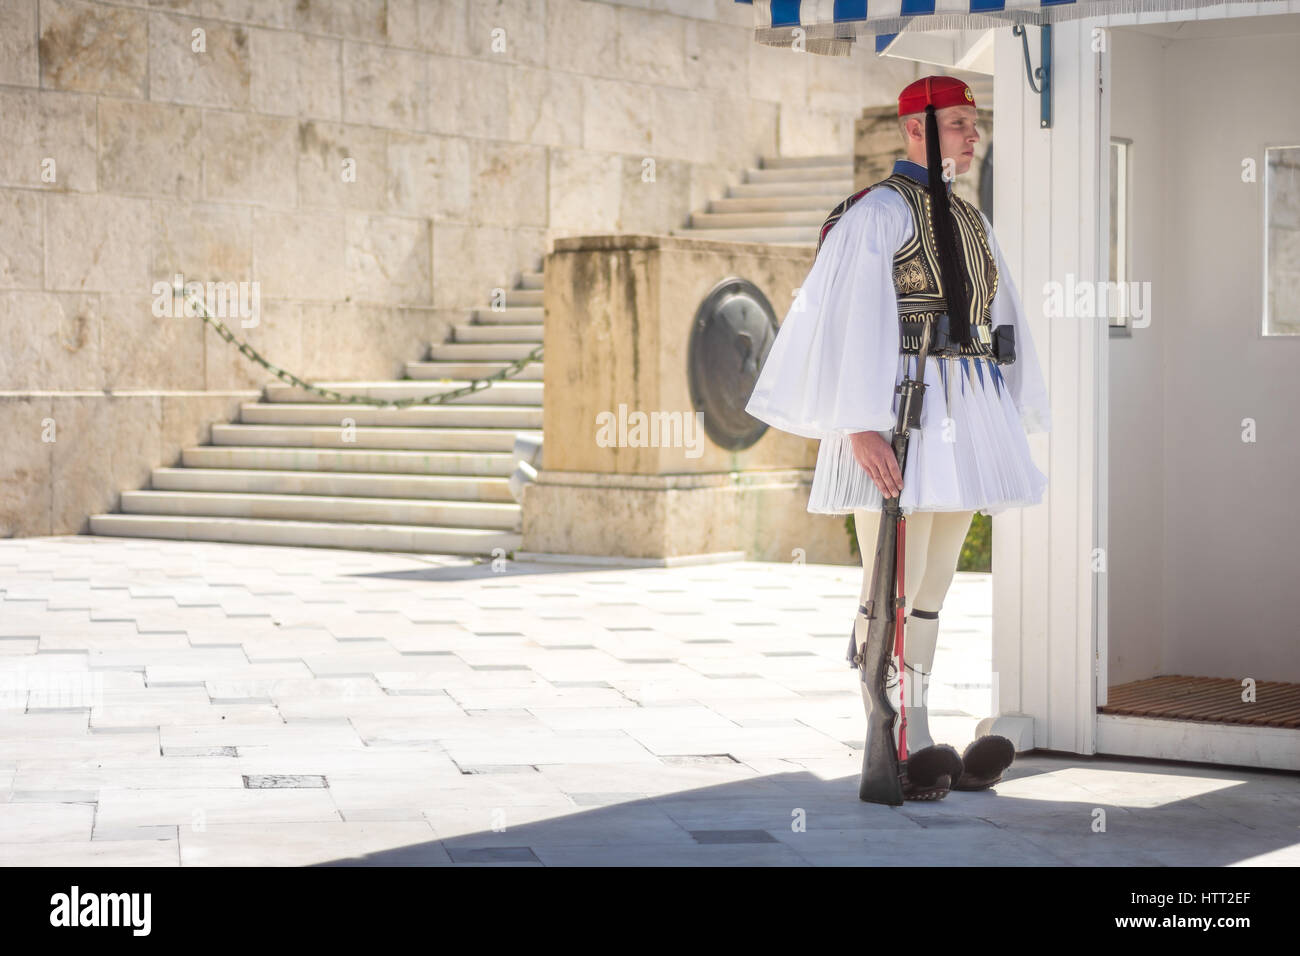 Athens, Greece - March 5, 2017: Evzonas dressed in traditional Greek army uniform (Tsolias) standing guard at the Unknown Soldier Tomp monument Stock Photo